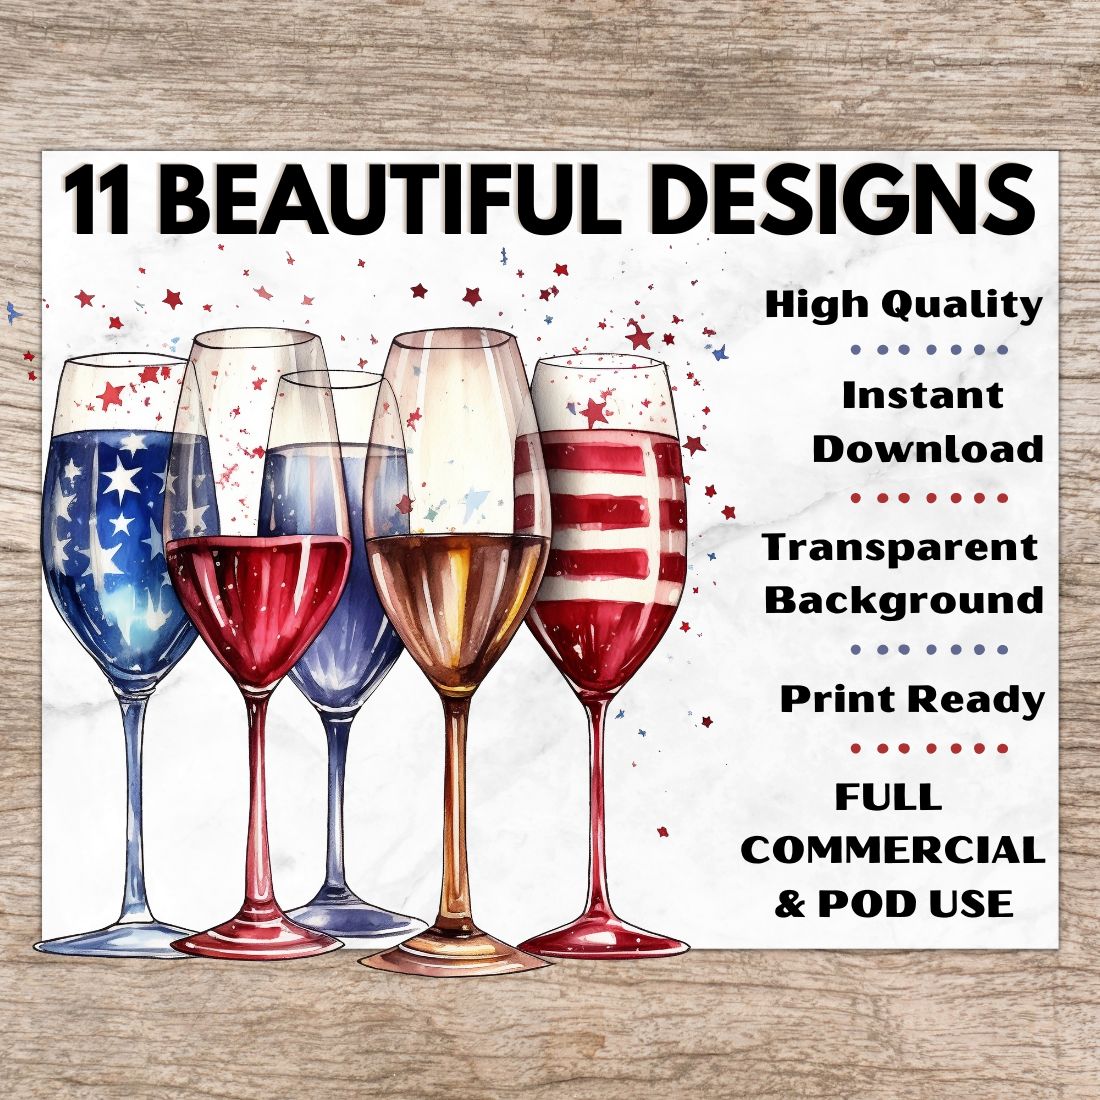 11 Watercolor American Wineglass PNG, Wineglass Clipart, Transparent, Digital Paper Craft, Illustrations, Watercolor Clipart for Scrapbook, Invitation, Wall Art, T-Shirt preview image.